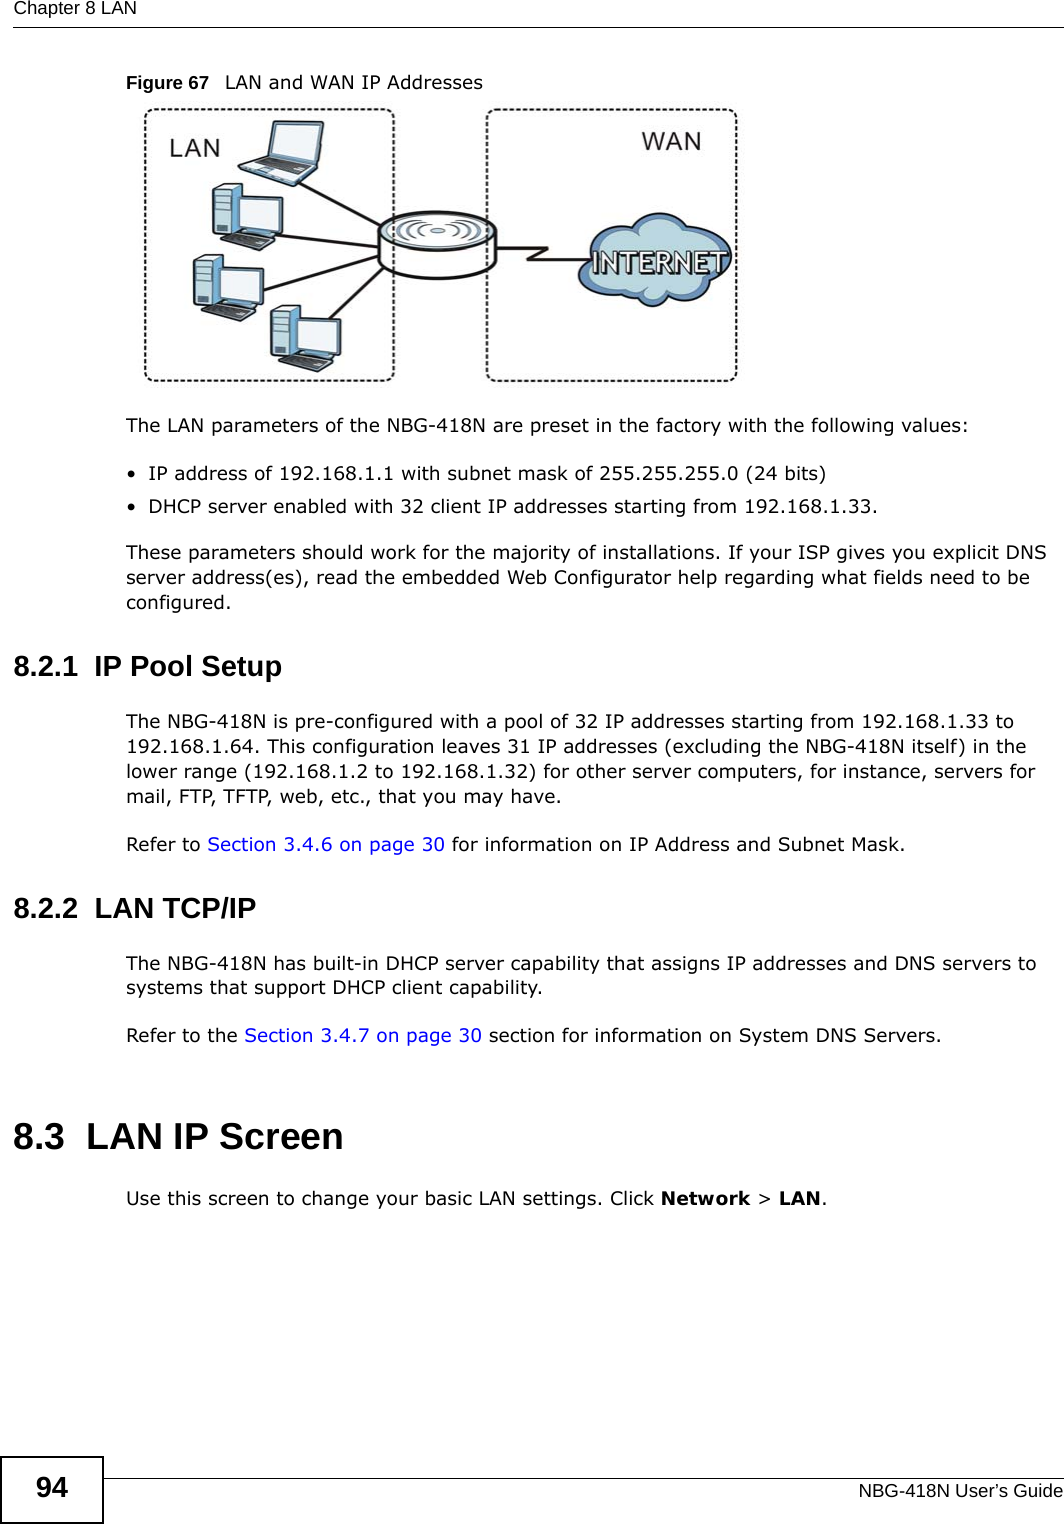 Chapter 8 LANNBG-418N User’s Guide94Figure 67   LAN and WAN IP AddressesThe LAN parameters of the NBG-418N are preset in the factory with the following values:• IP address of 192.168.1.1 with subnet mask of 255.255.255.0 (24 bits)• DHCP server enabled with 32 client IP addresses starting from 192.168.1.33. These parameters should work for the majority of installations. If your ISP gives you explicit DNS server address(es), read the embedded Web Configurator help regarding what fields need to be configured.8.2.1  IP Pool SetupThe NBG-418N is pre-configured with a pool of 32 IP addresses starting from 192.168.1.33 to 192.168.1.64. This configuration leaves 31 IP addresses (excluding the NBG-418N itself) in the lower range (192.168.1.2 to 192.168.1.32) for other server computers, for instance, servers for mail, FTP, TFTP, web, etc., that you may have.Refer to Section 3.4.6 on page 30 for information on IP Address and Subnet Mask.8.2.2  LAN TCP/IP The NBG-418N has built-in DHCP server capability that assigns IP addresses and DNS servers to systems that support DHCP client capability.Refer to the Section 3.4.7 on page 30 section for information on System DNS Servers.8.3  LAN IP ScreenUse this screen to change your basic LAN settings. Click Network &gt; LAN.